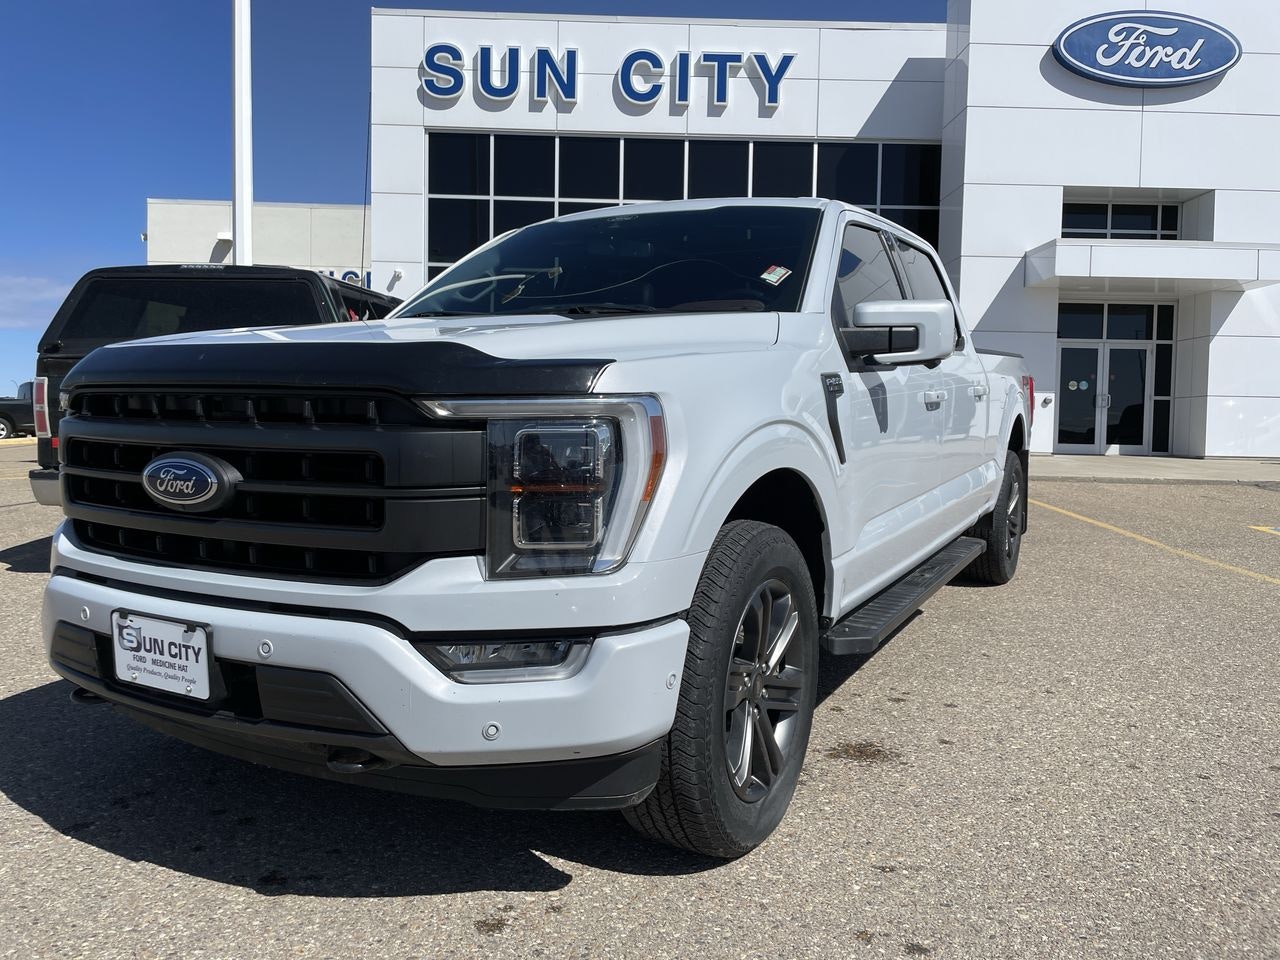 2021 Ford F-150 Lariat Sport FX4 502A LONG BOX with MOON ROOF (TS24013A) Main Image